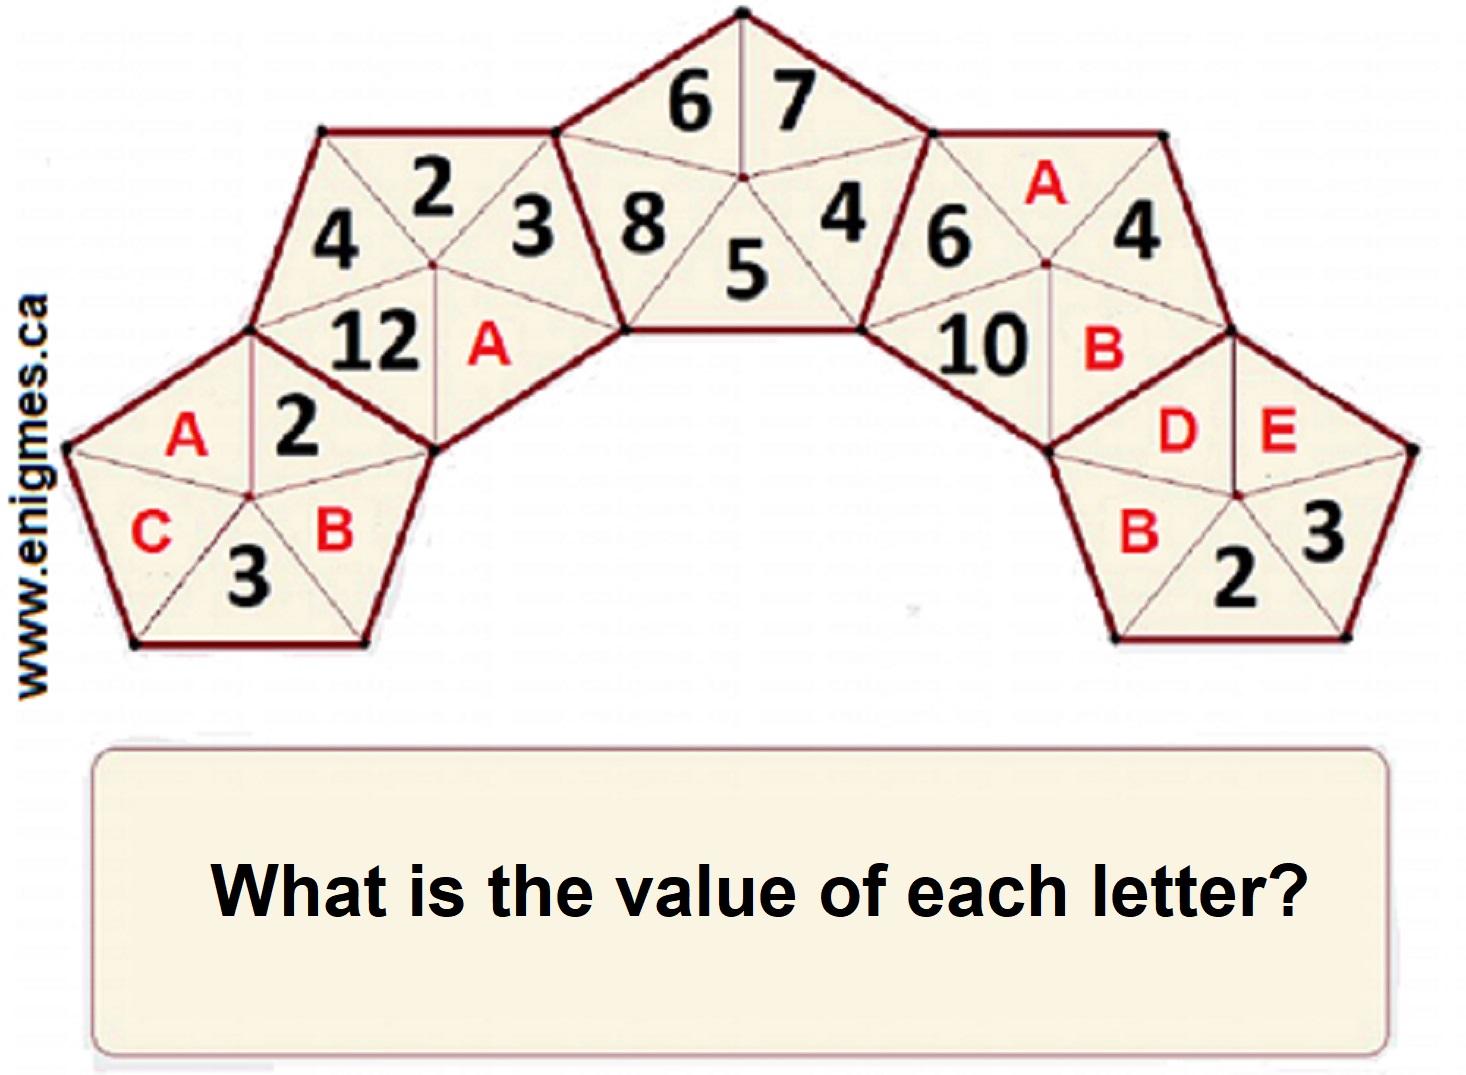 What is the value of each letter?